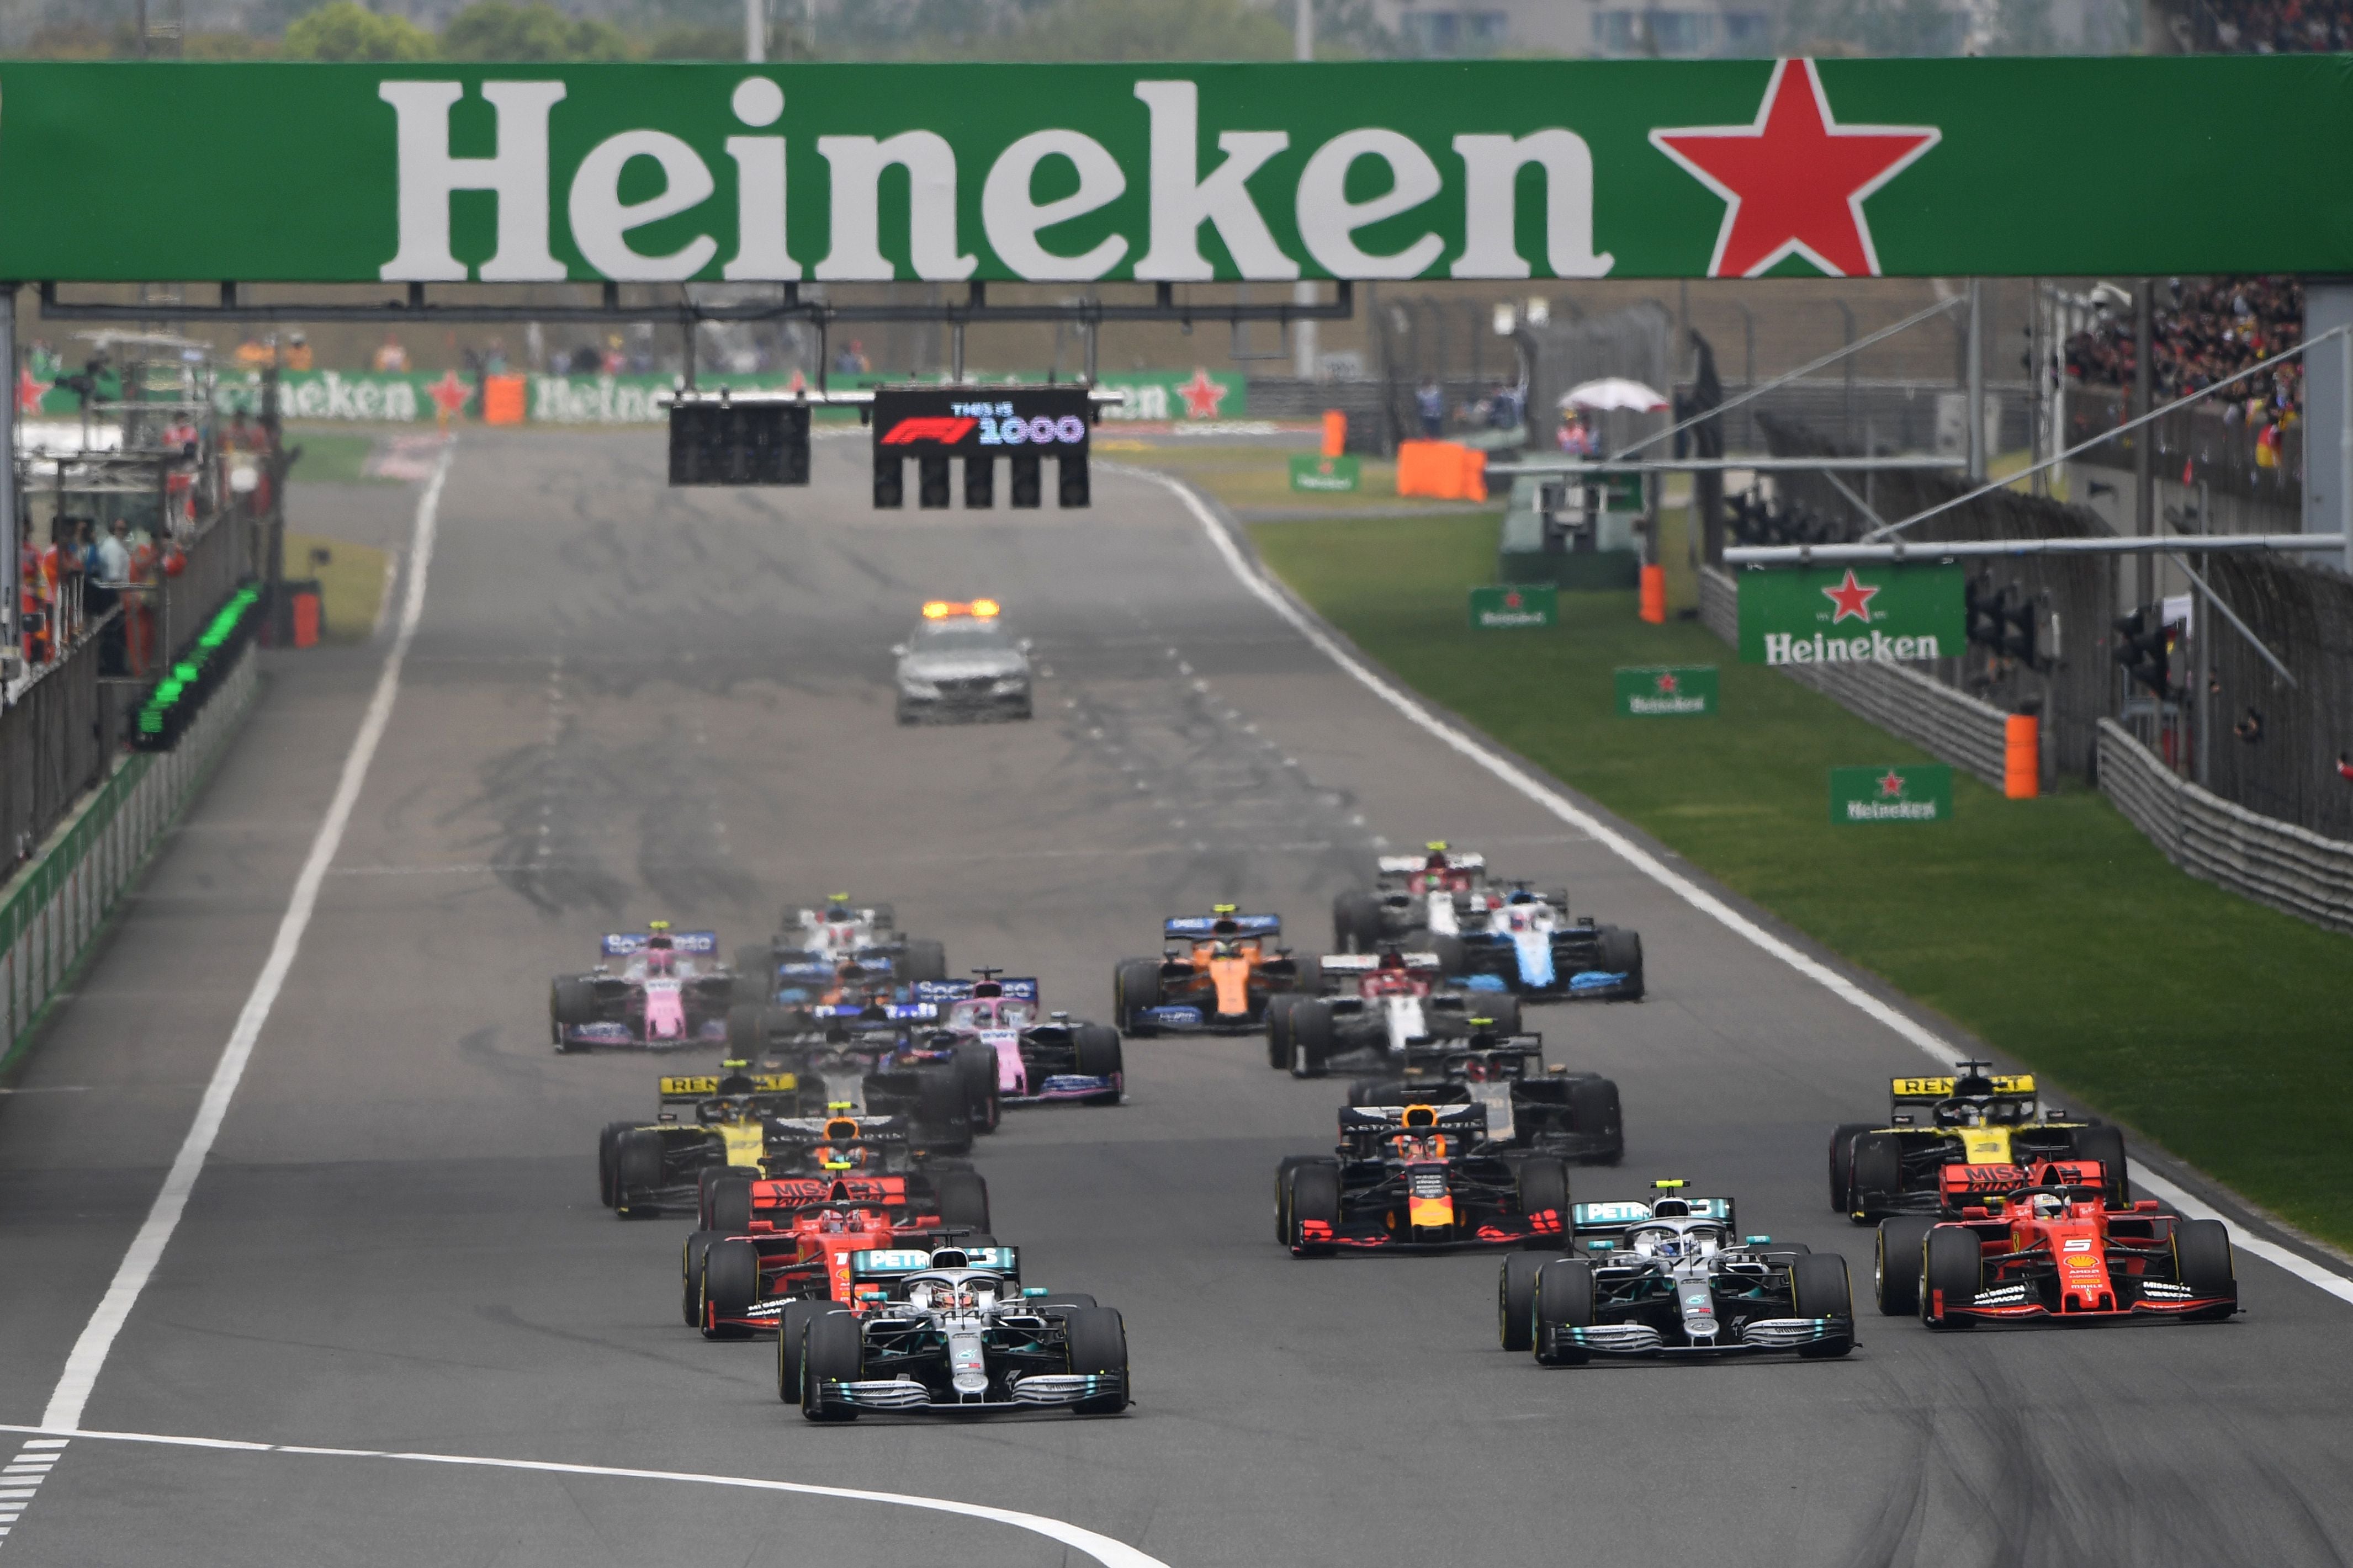 Formula 1 has confirmed that the 2023 Chinese Grand Prix will not take place